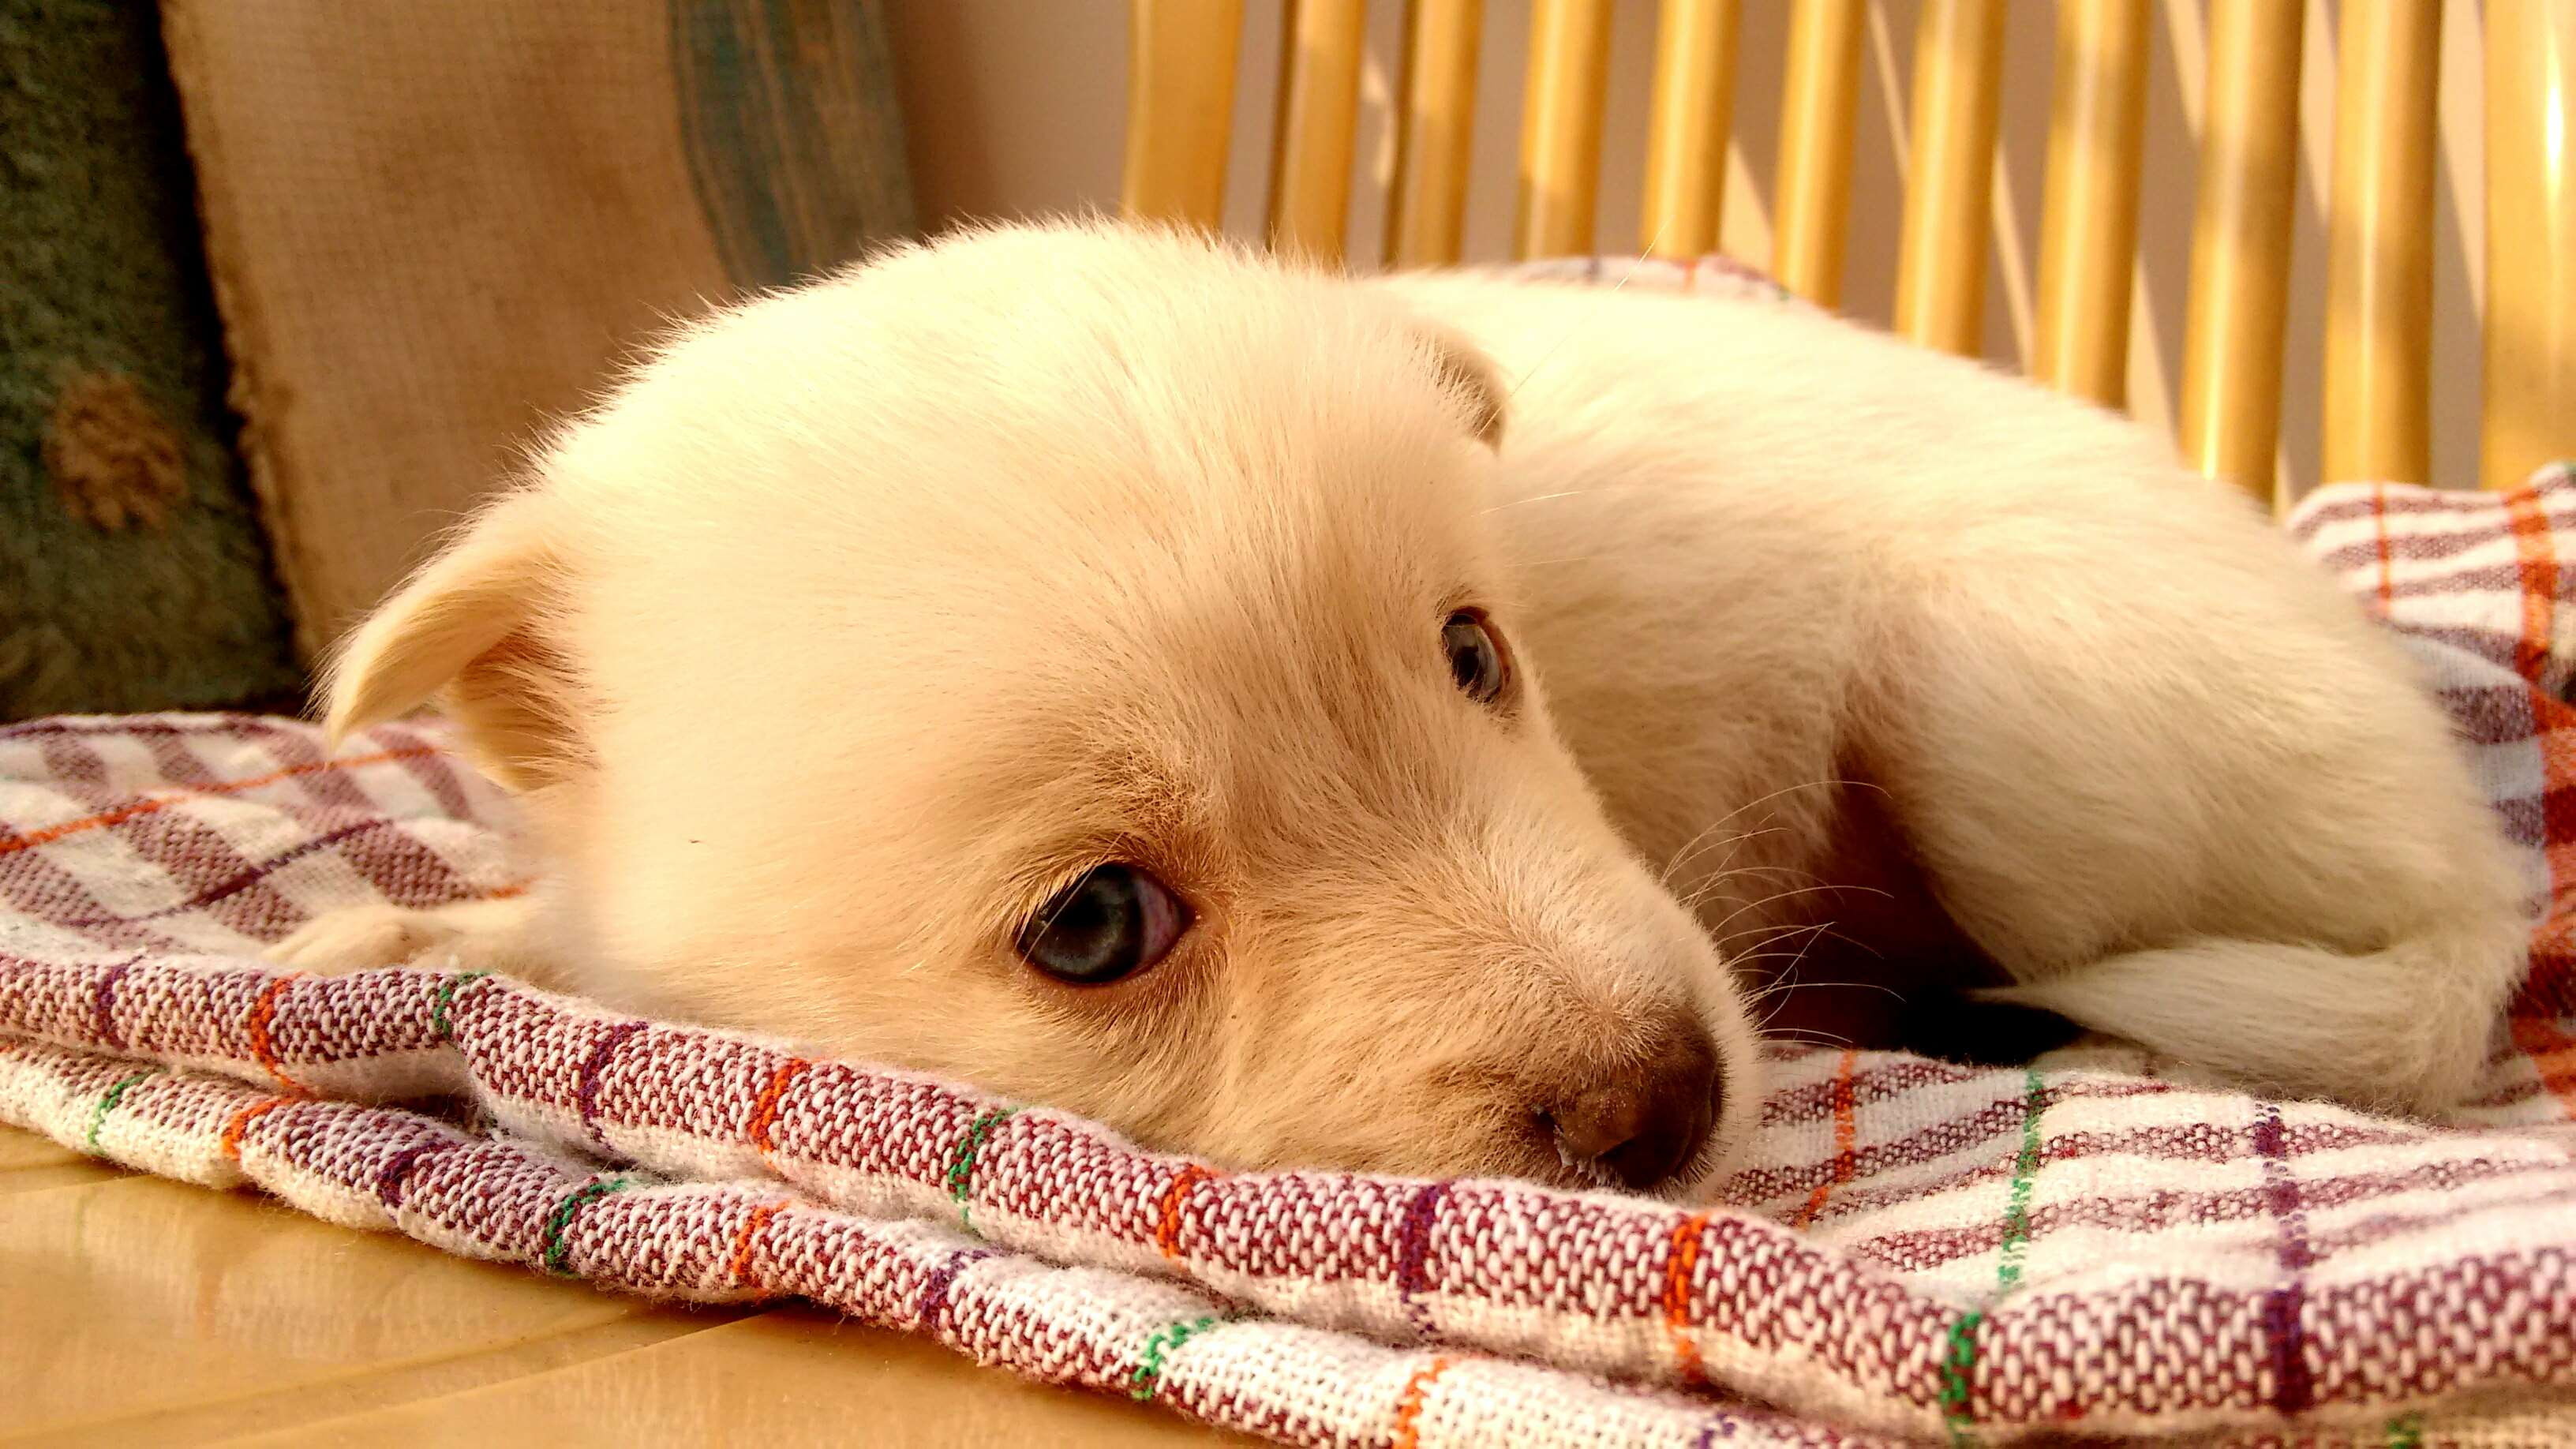 3264x1836 adorable, animal, baby, baby dog, canine, cute, domestic, little